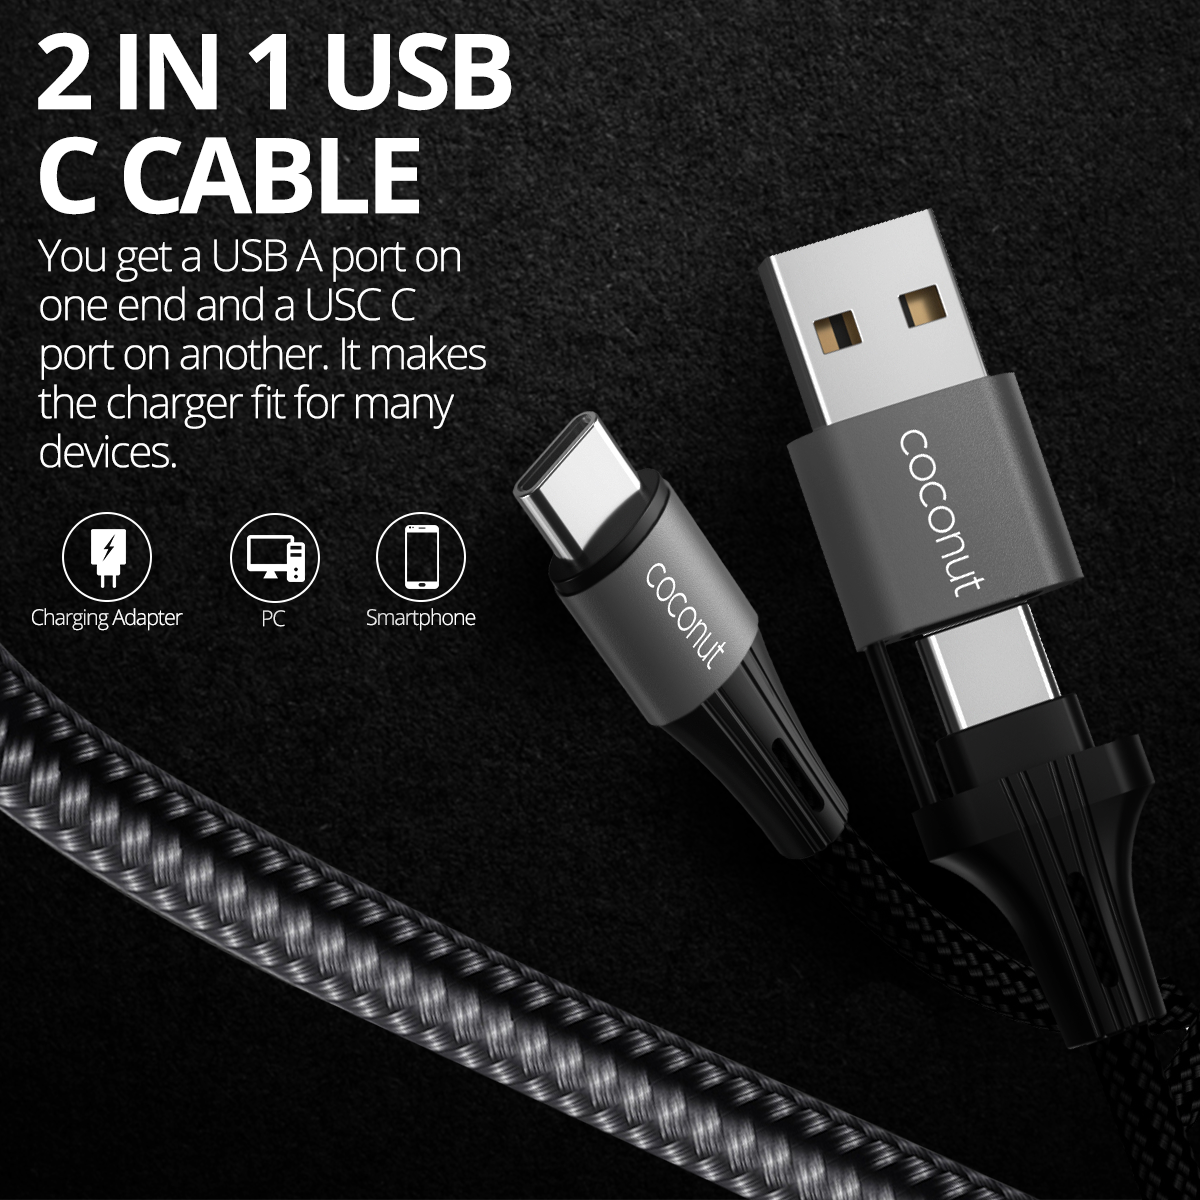 Charging - USB A to USB C Cable